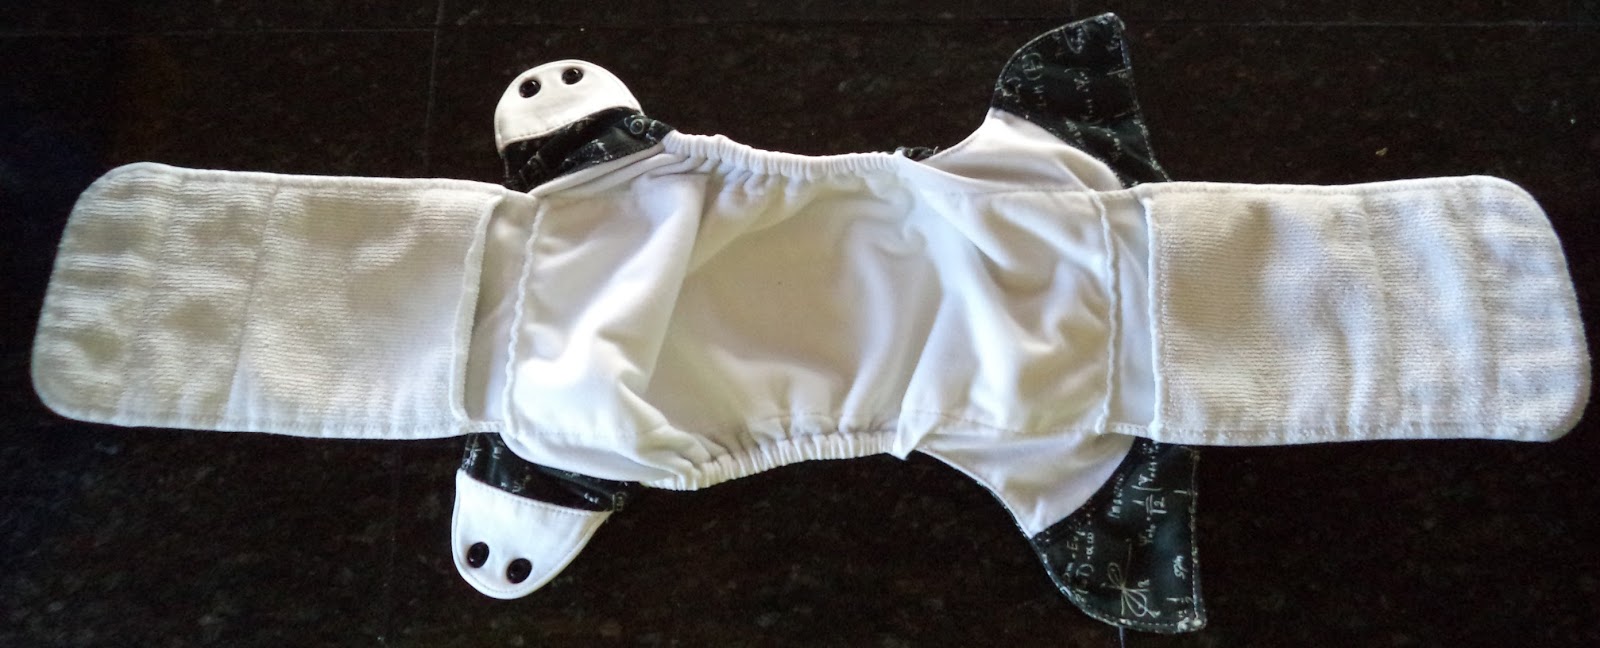 Cloth Diapers and Daycare: Packing the Bag {Like a Boss} – Dirty